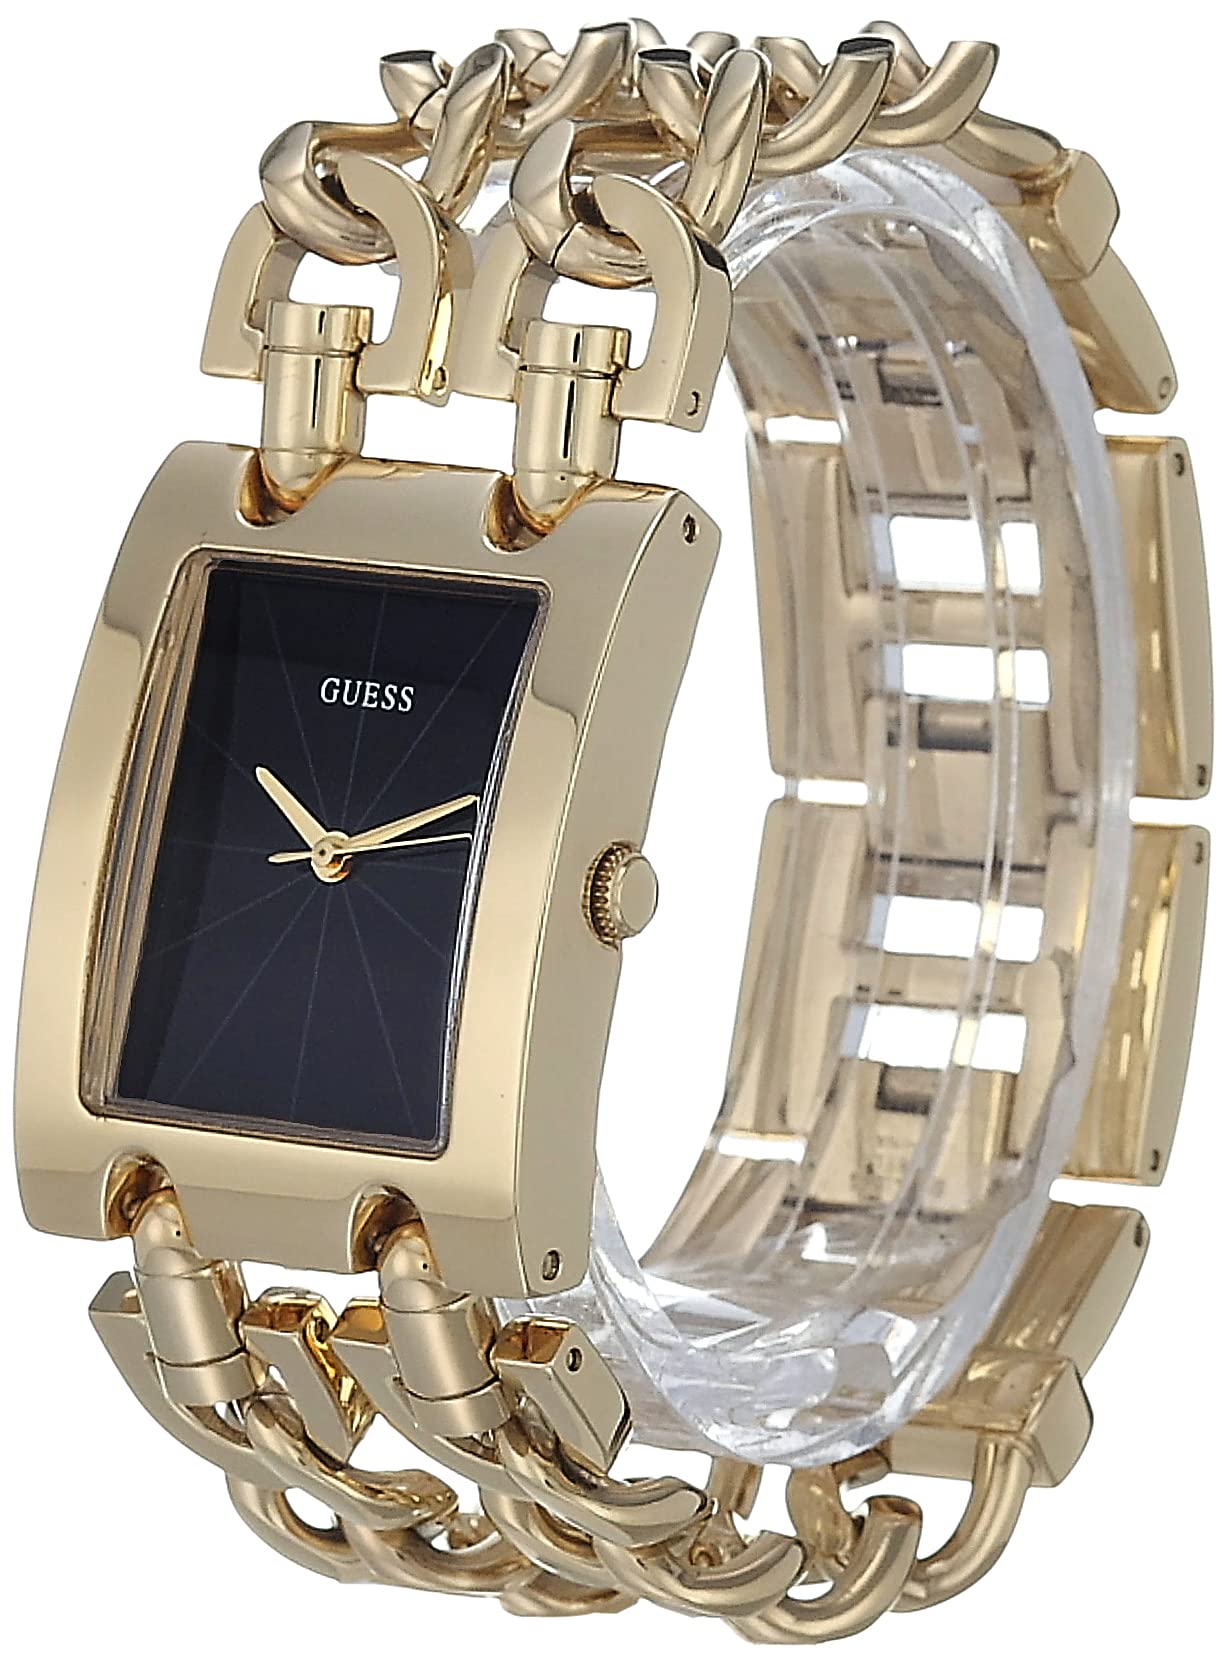 GUESS Women's Multi-Chain Bracelet Watch with Self-Adjustable Links